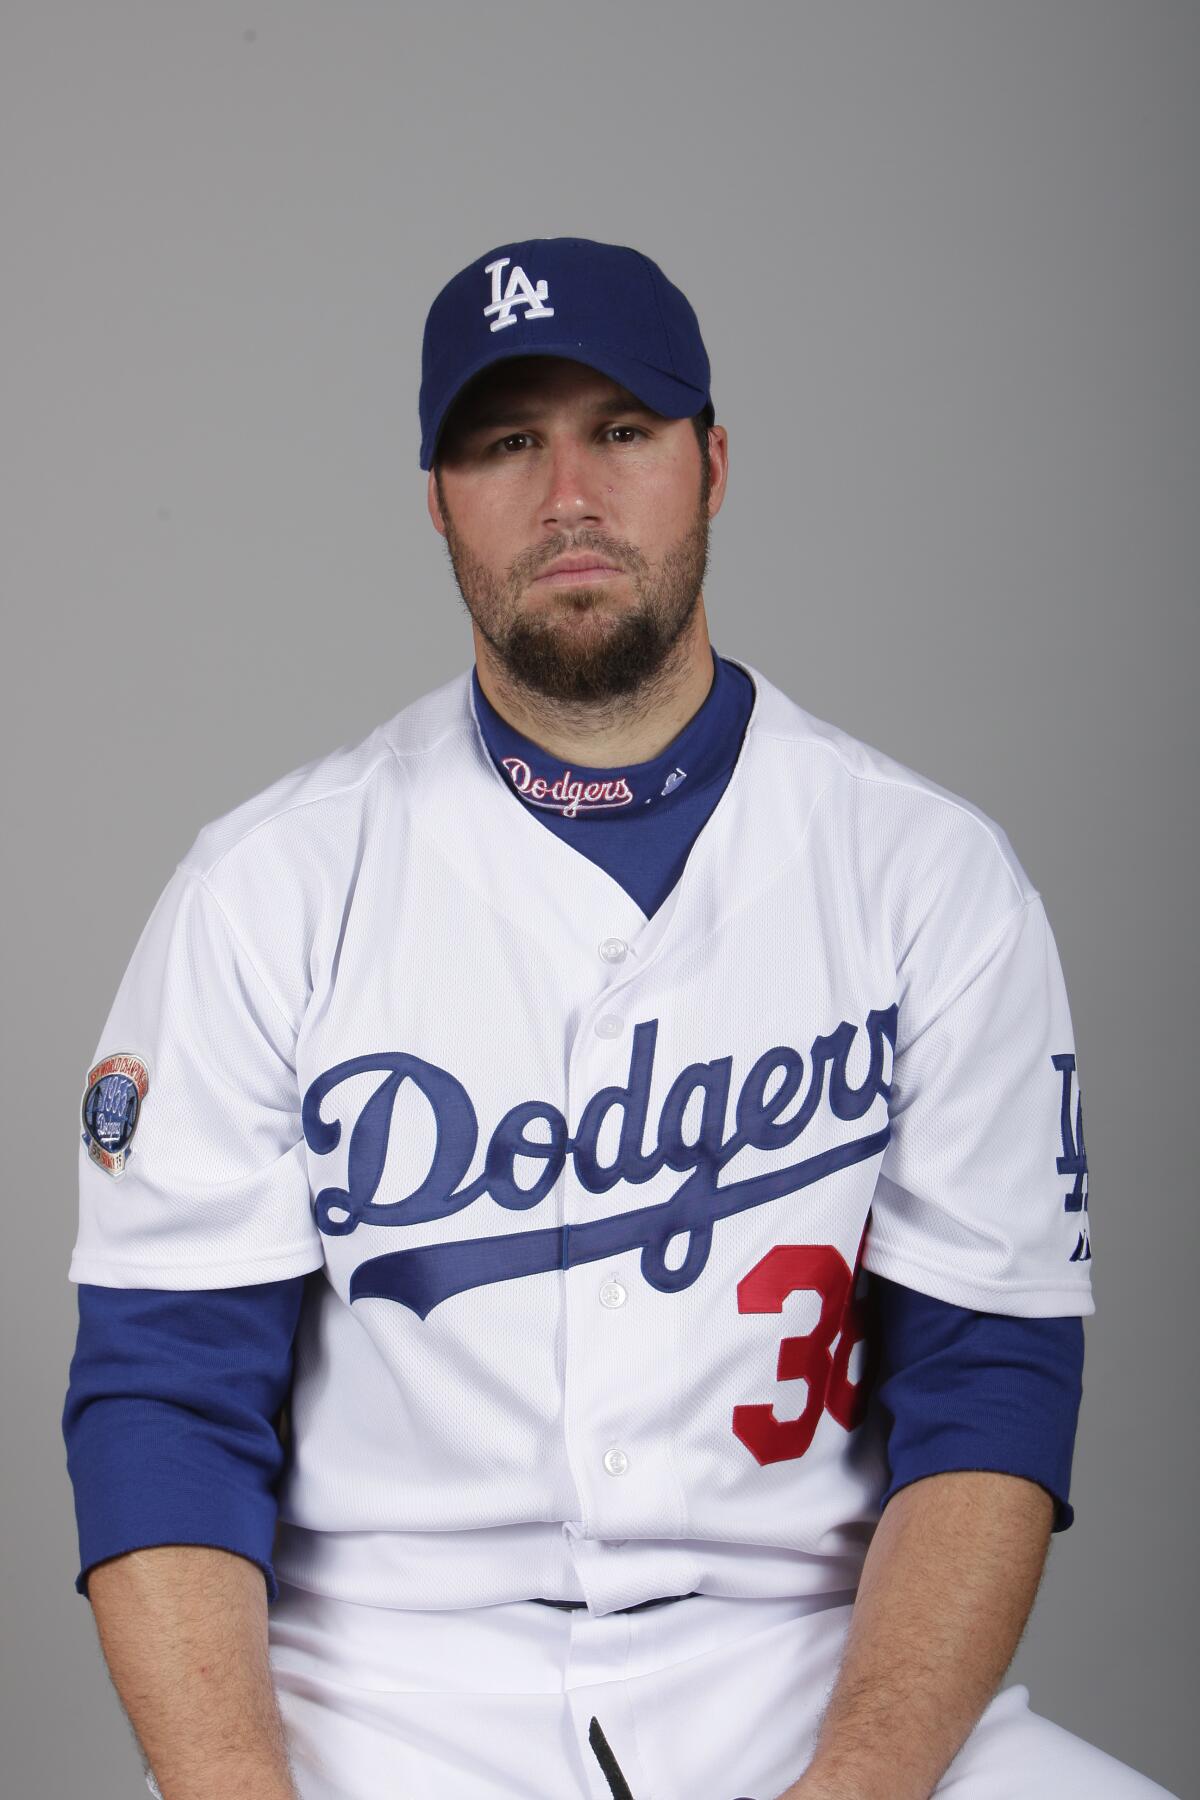 Los Angeles Dodgers' Eric Gagne during photo day at the team's spring training facility.